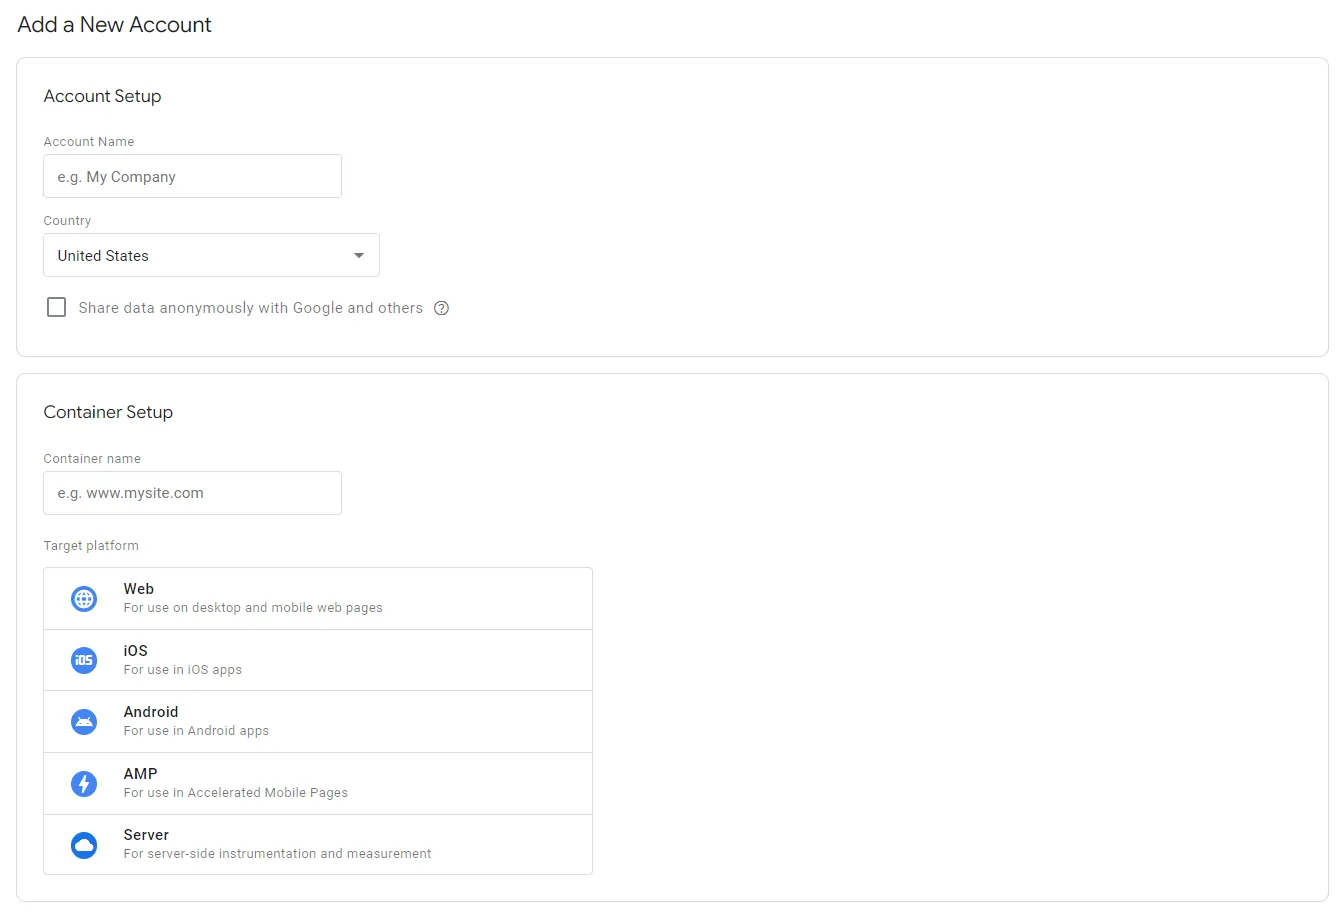 The view of the Google Tag Manager (GTM) account set up